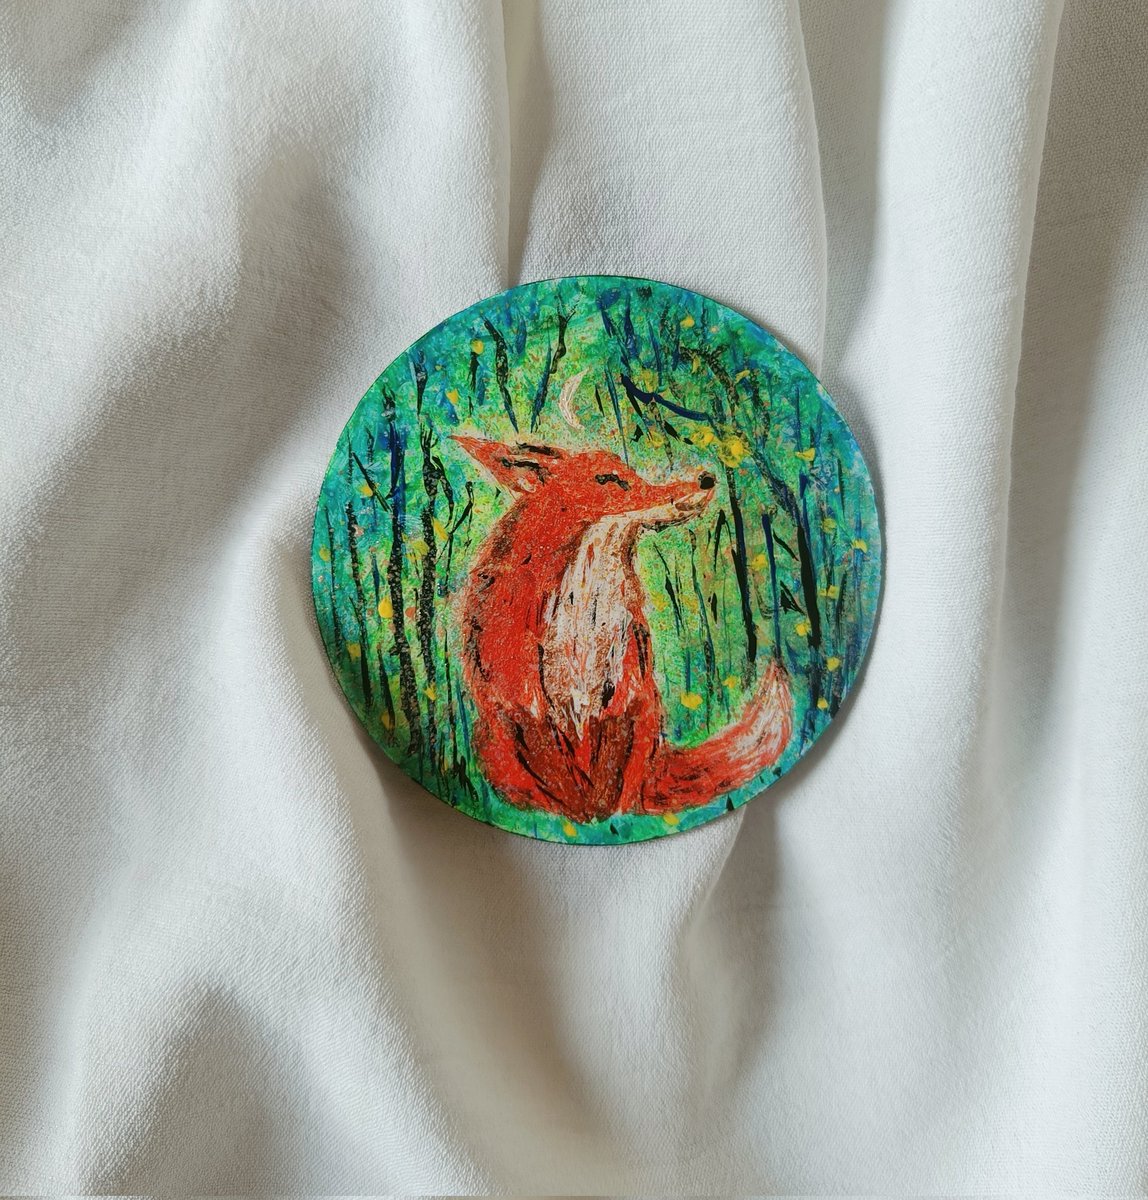 I've shared these enough times but they're still looking for a loving home so here are the two round fridge magnets from the enchanted forest series. Baby Yoda and the Fox. DM to take home these magical beings. Size 3 inch X 3 Inch. Handpainted & varnished.Please share. #ArtbyTee